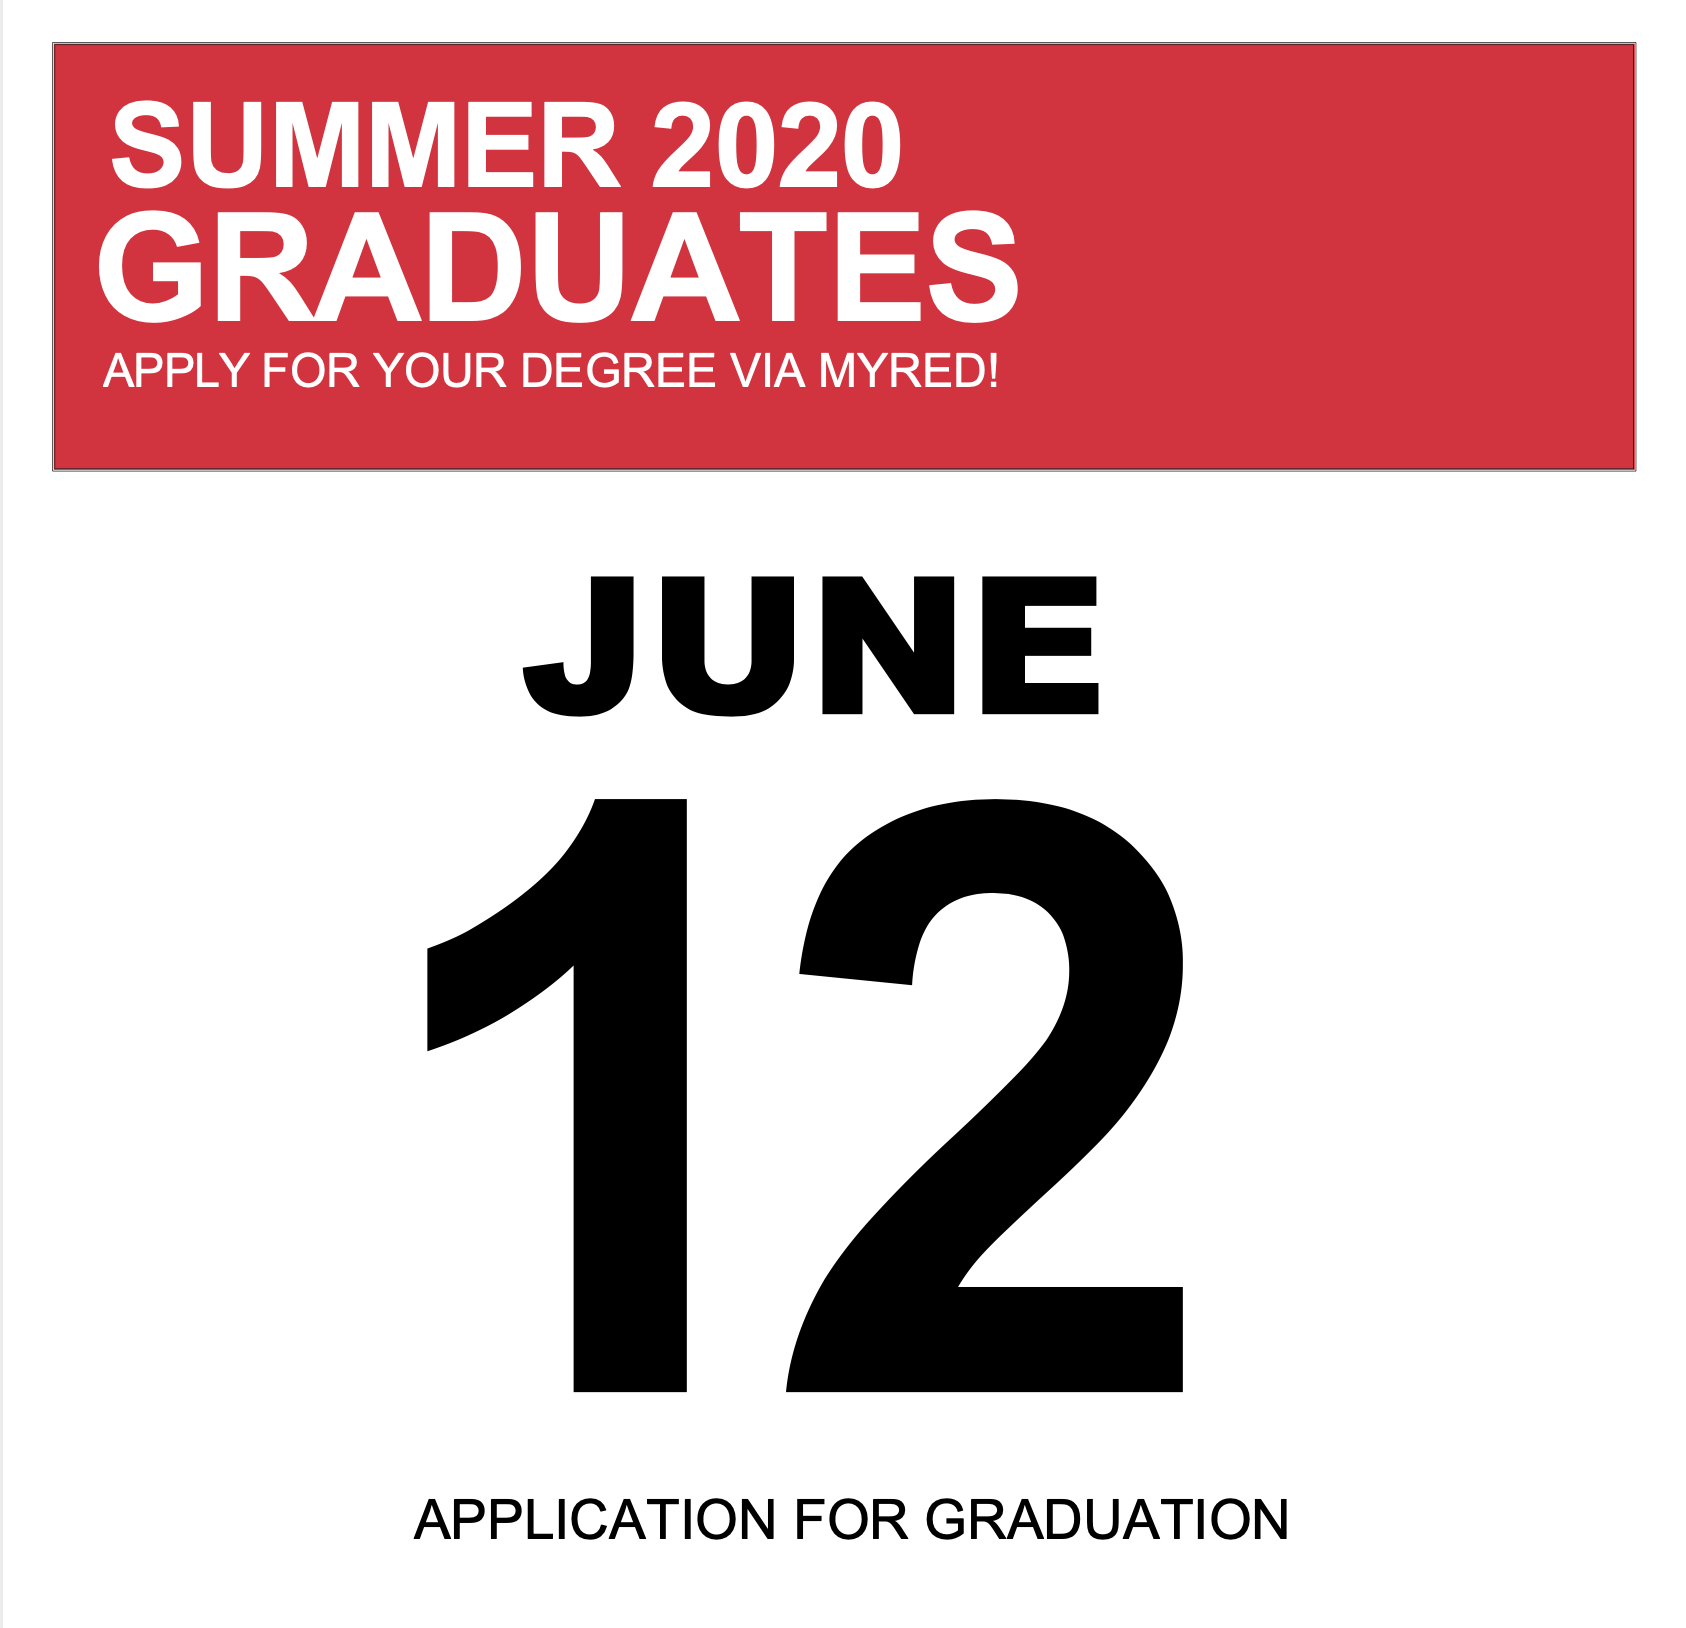 The deadline to submit your application for graduation after the summer semester is June 12. Apply for your degree via MyRED.